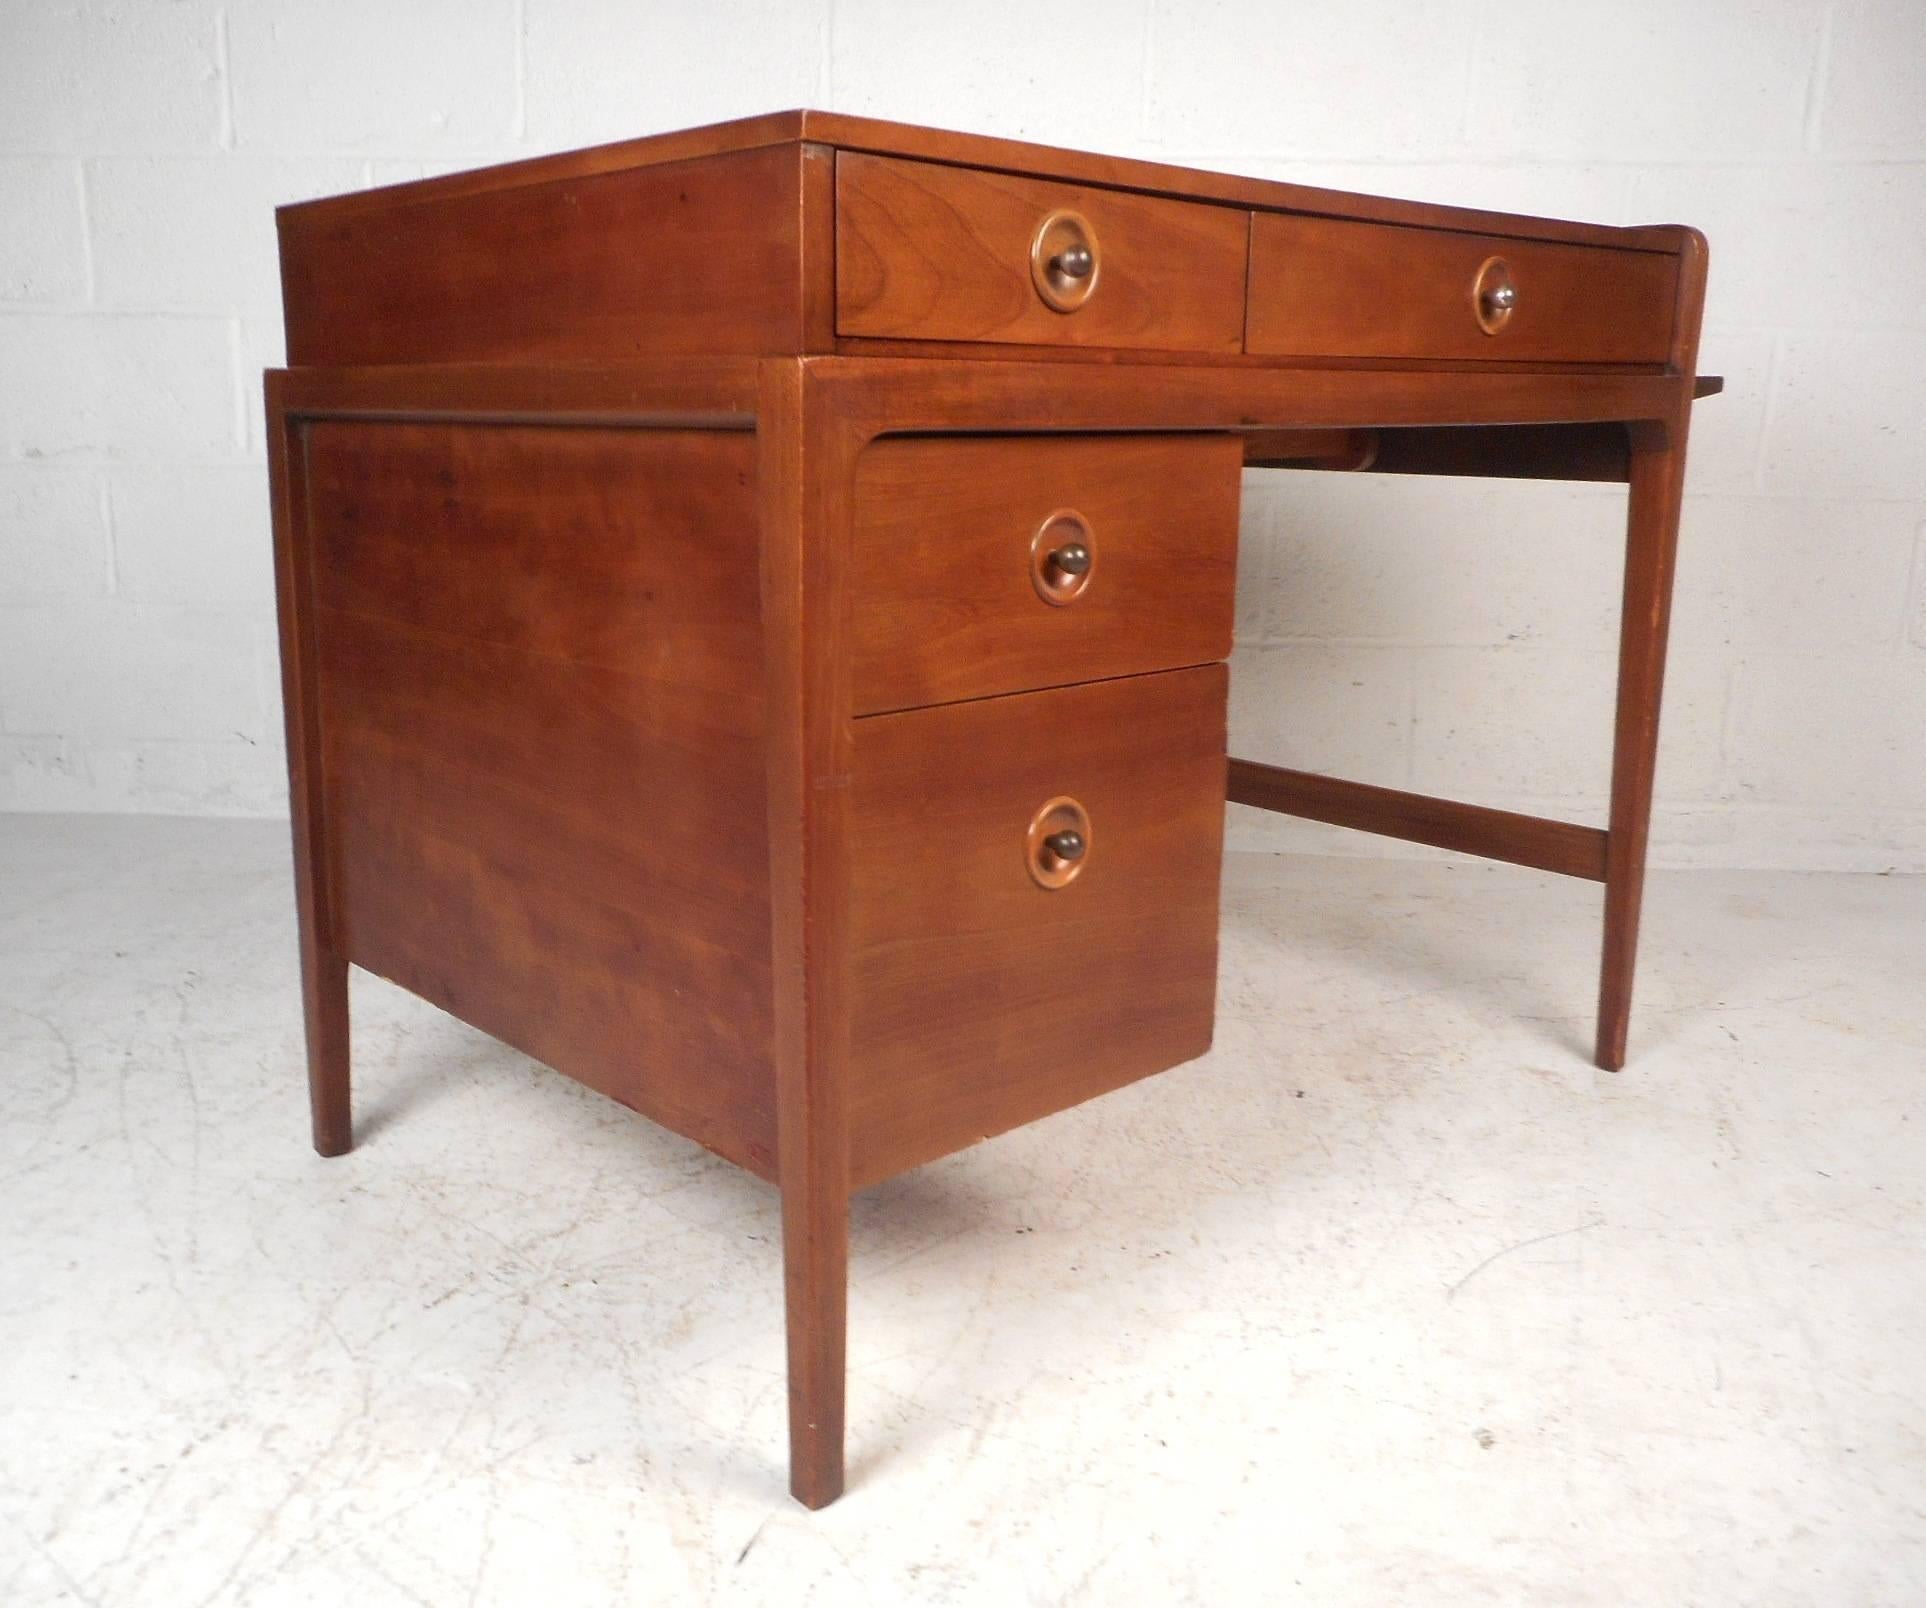 This gorgeous vintage modern desk features a side extension making the width go from 39.5 inches to 62 inches. Unusual design provides an abundance of work space with the option to retract the side saving room. This handsome case piece has recessed